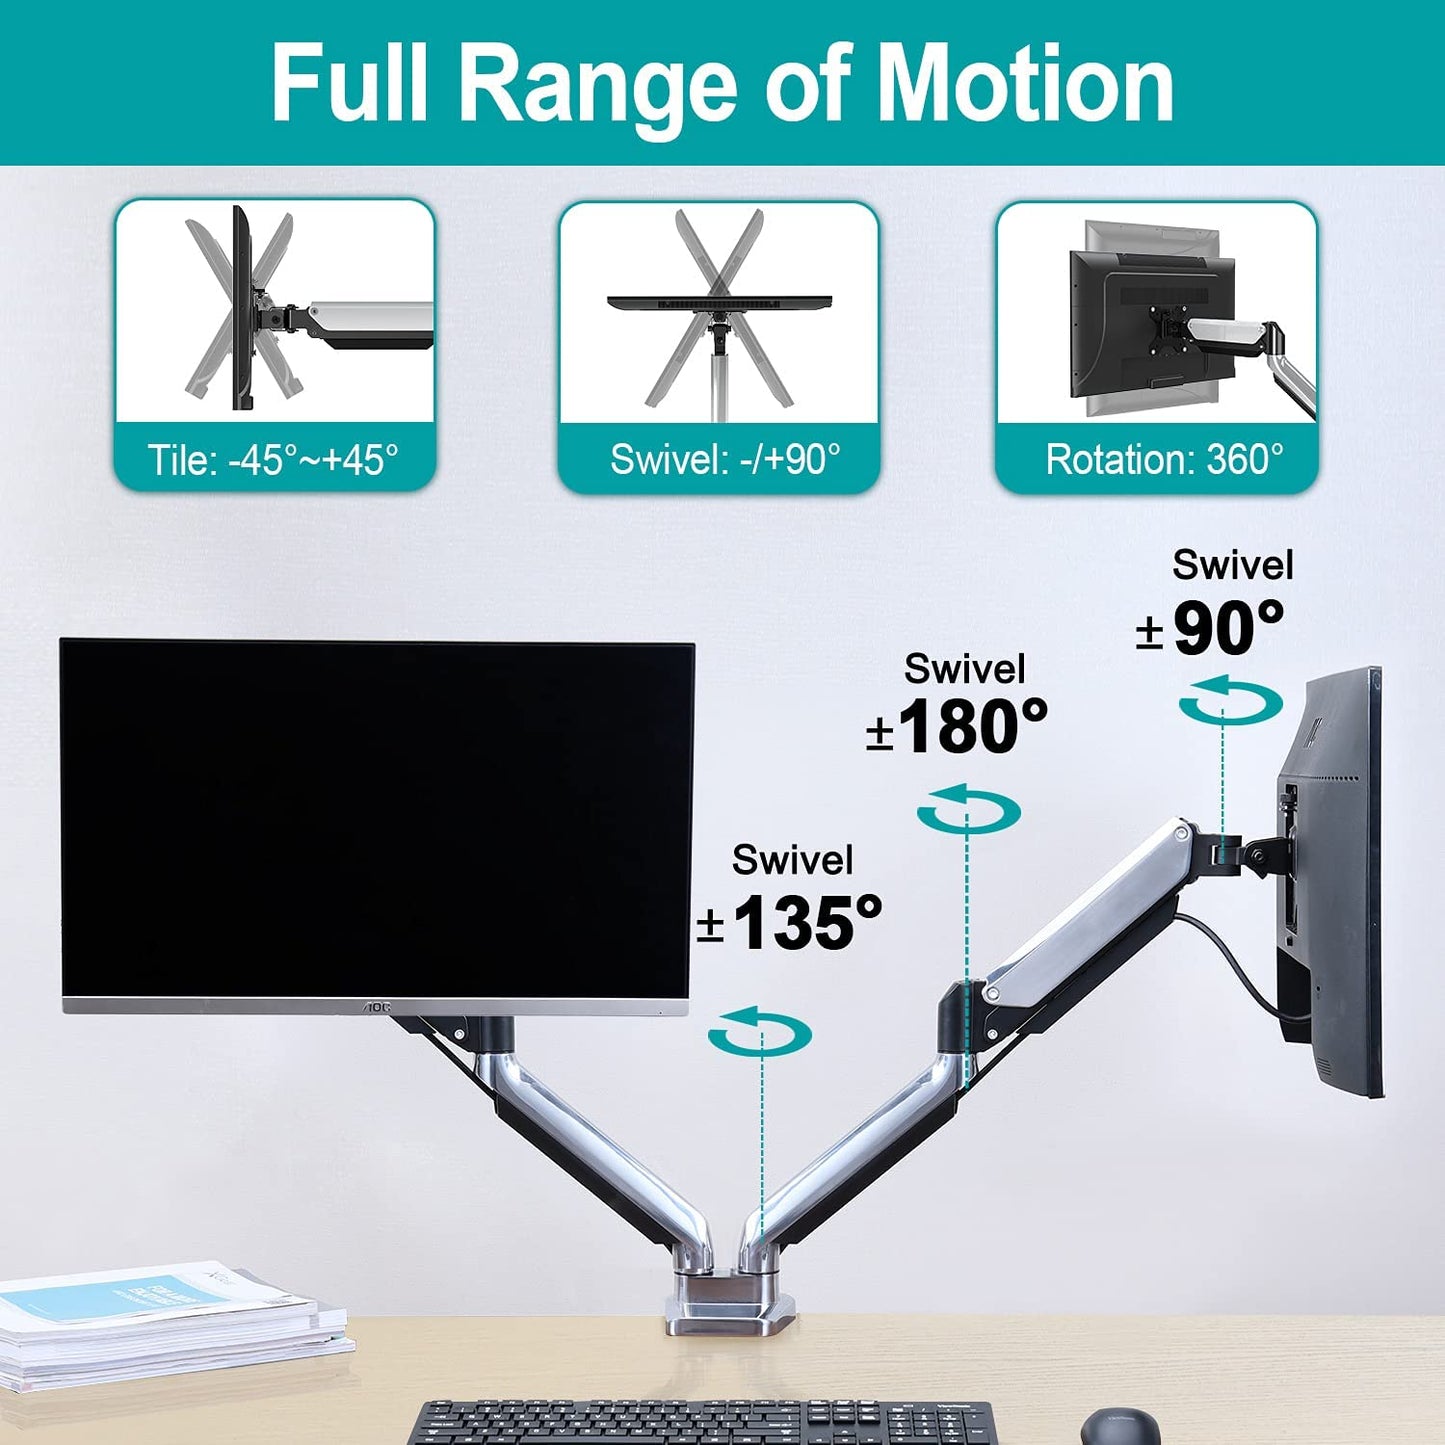 Dual Arms full motion monitor arm mount for fully adjusting monitors